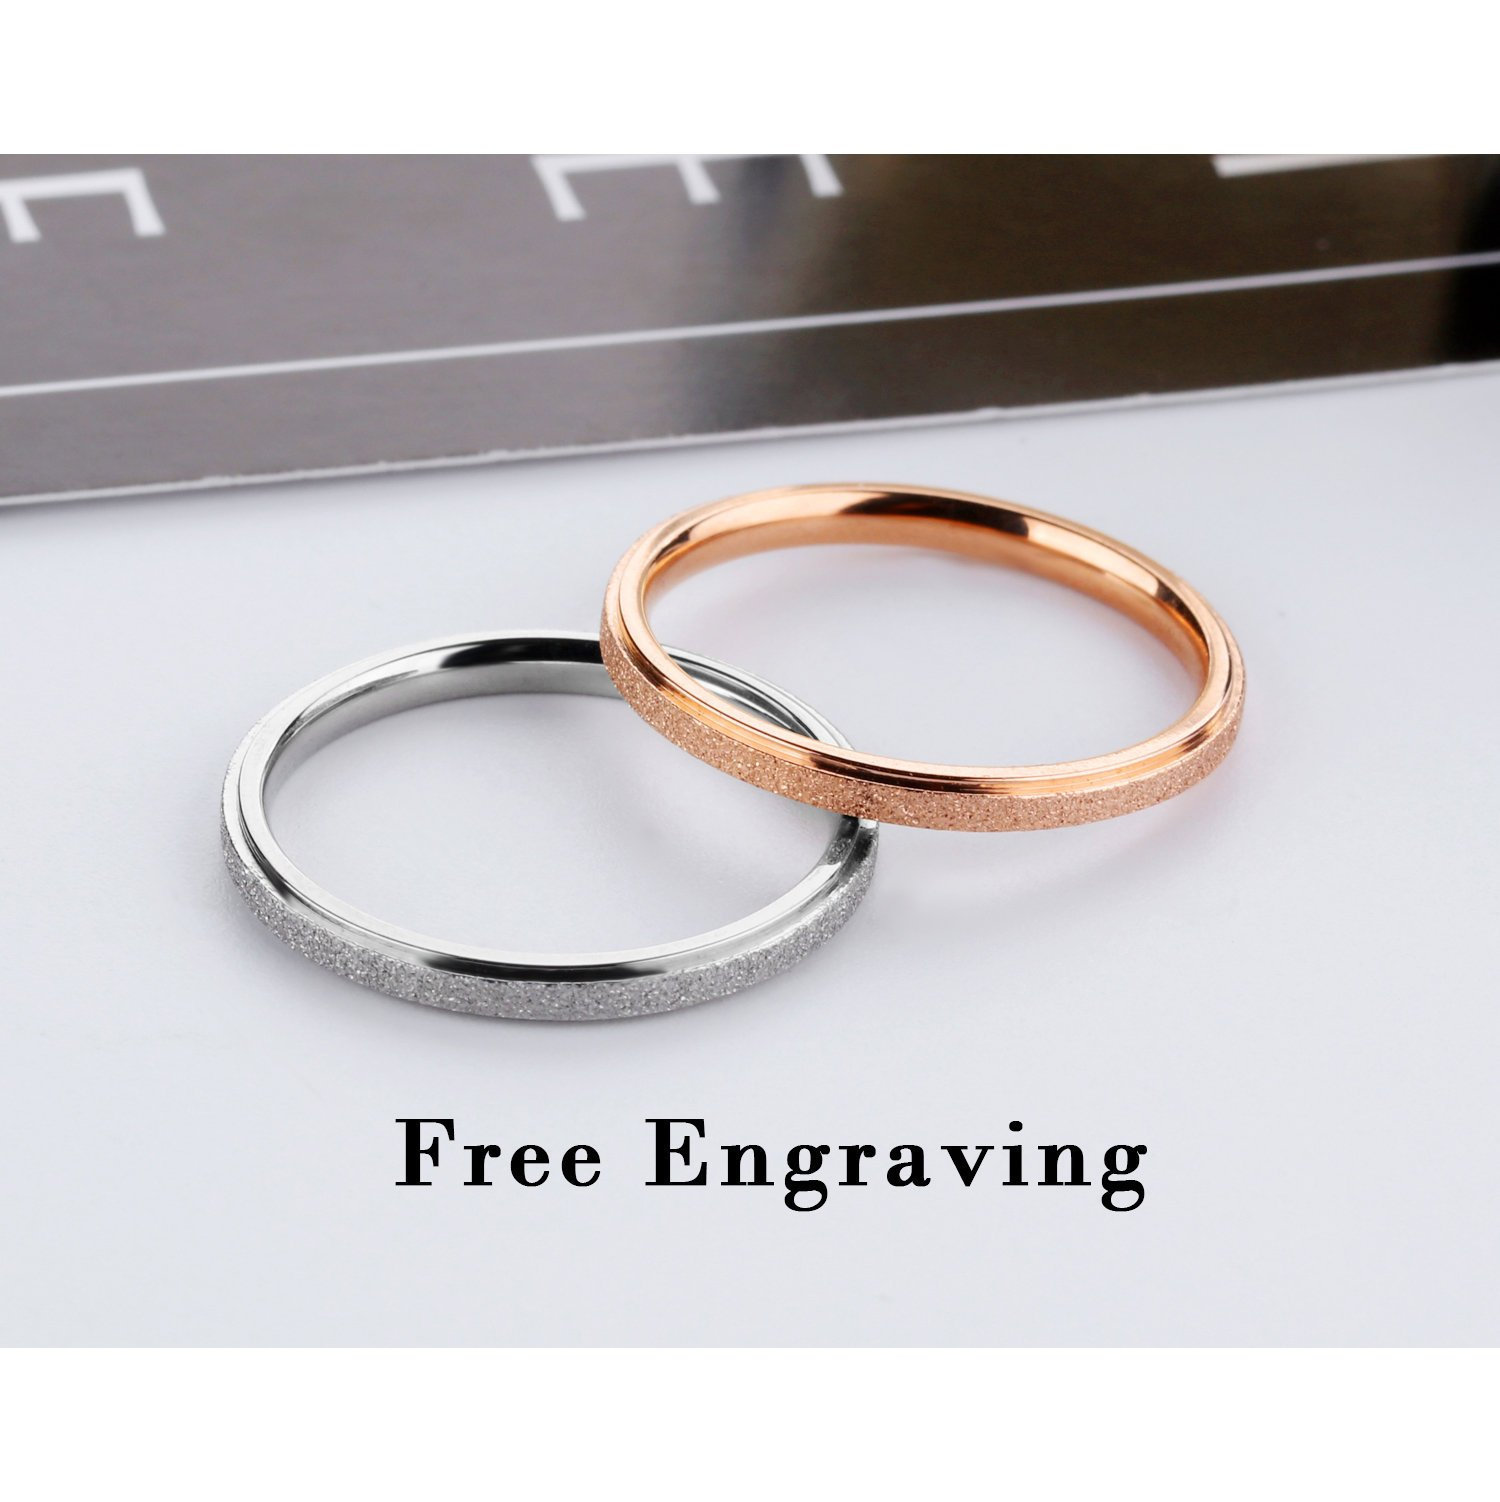 Wedding and friendship rings